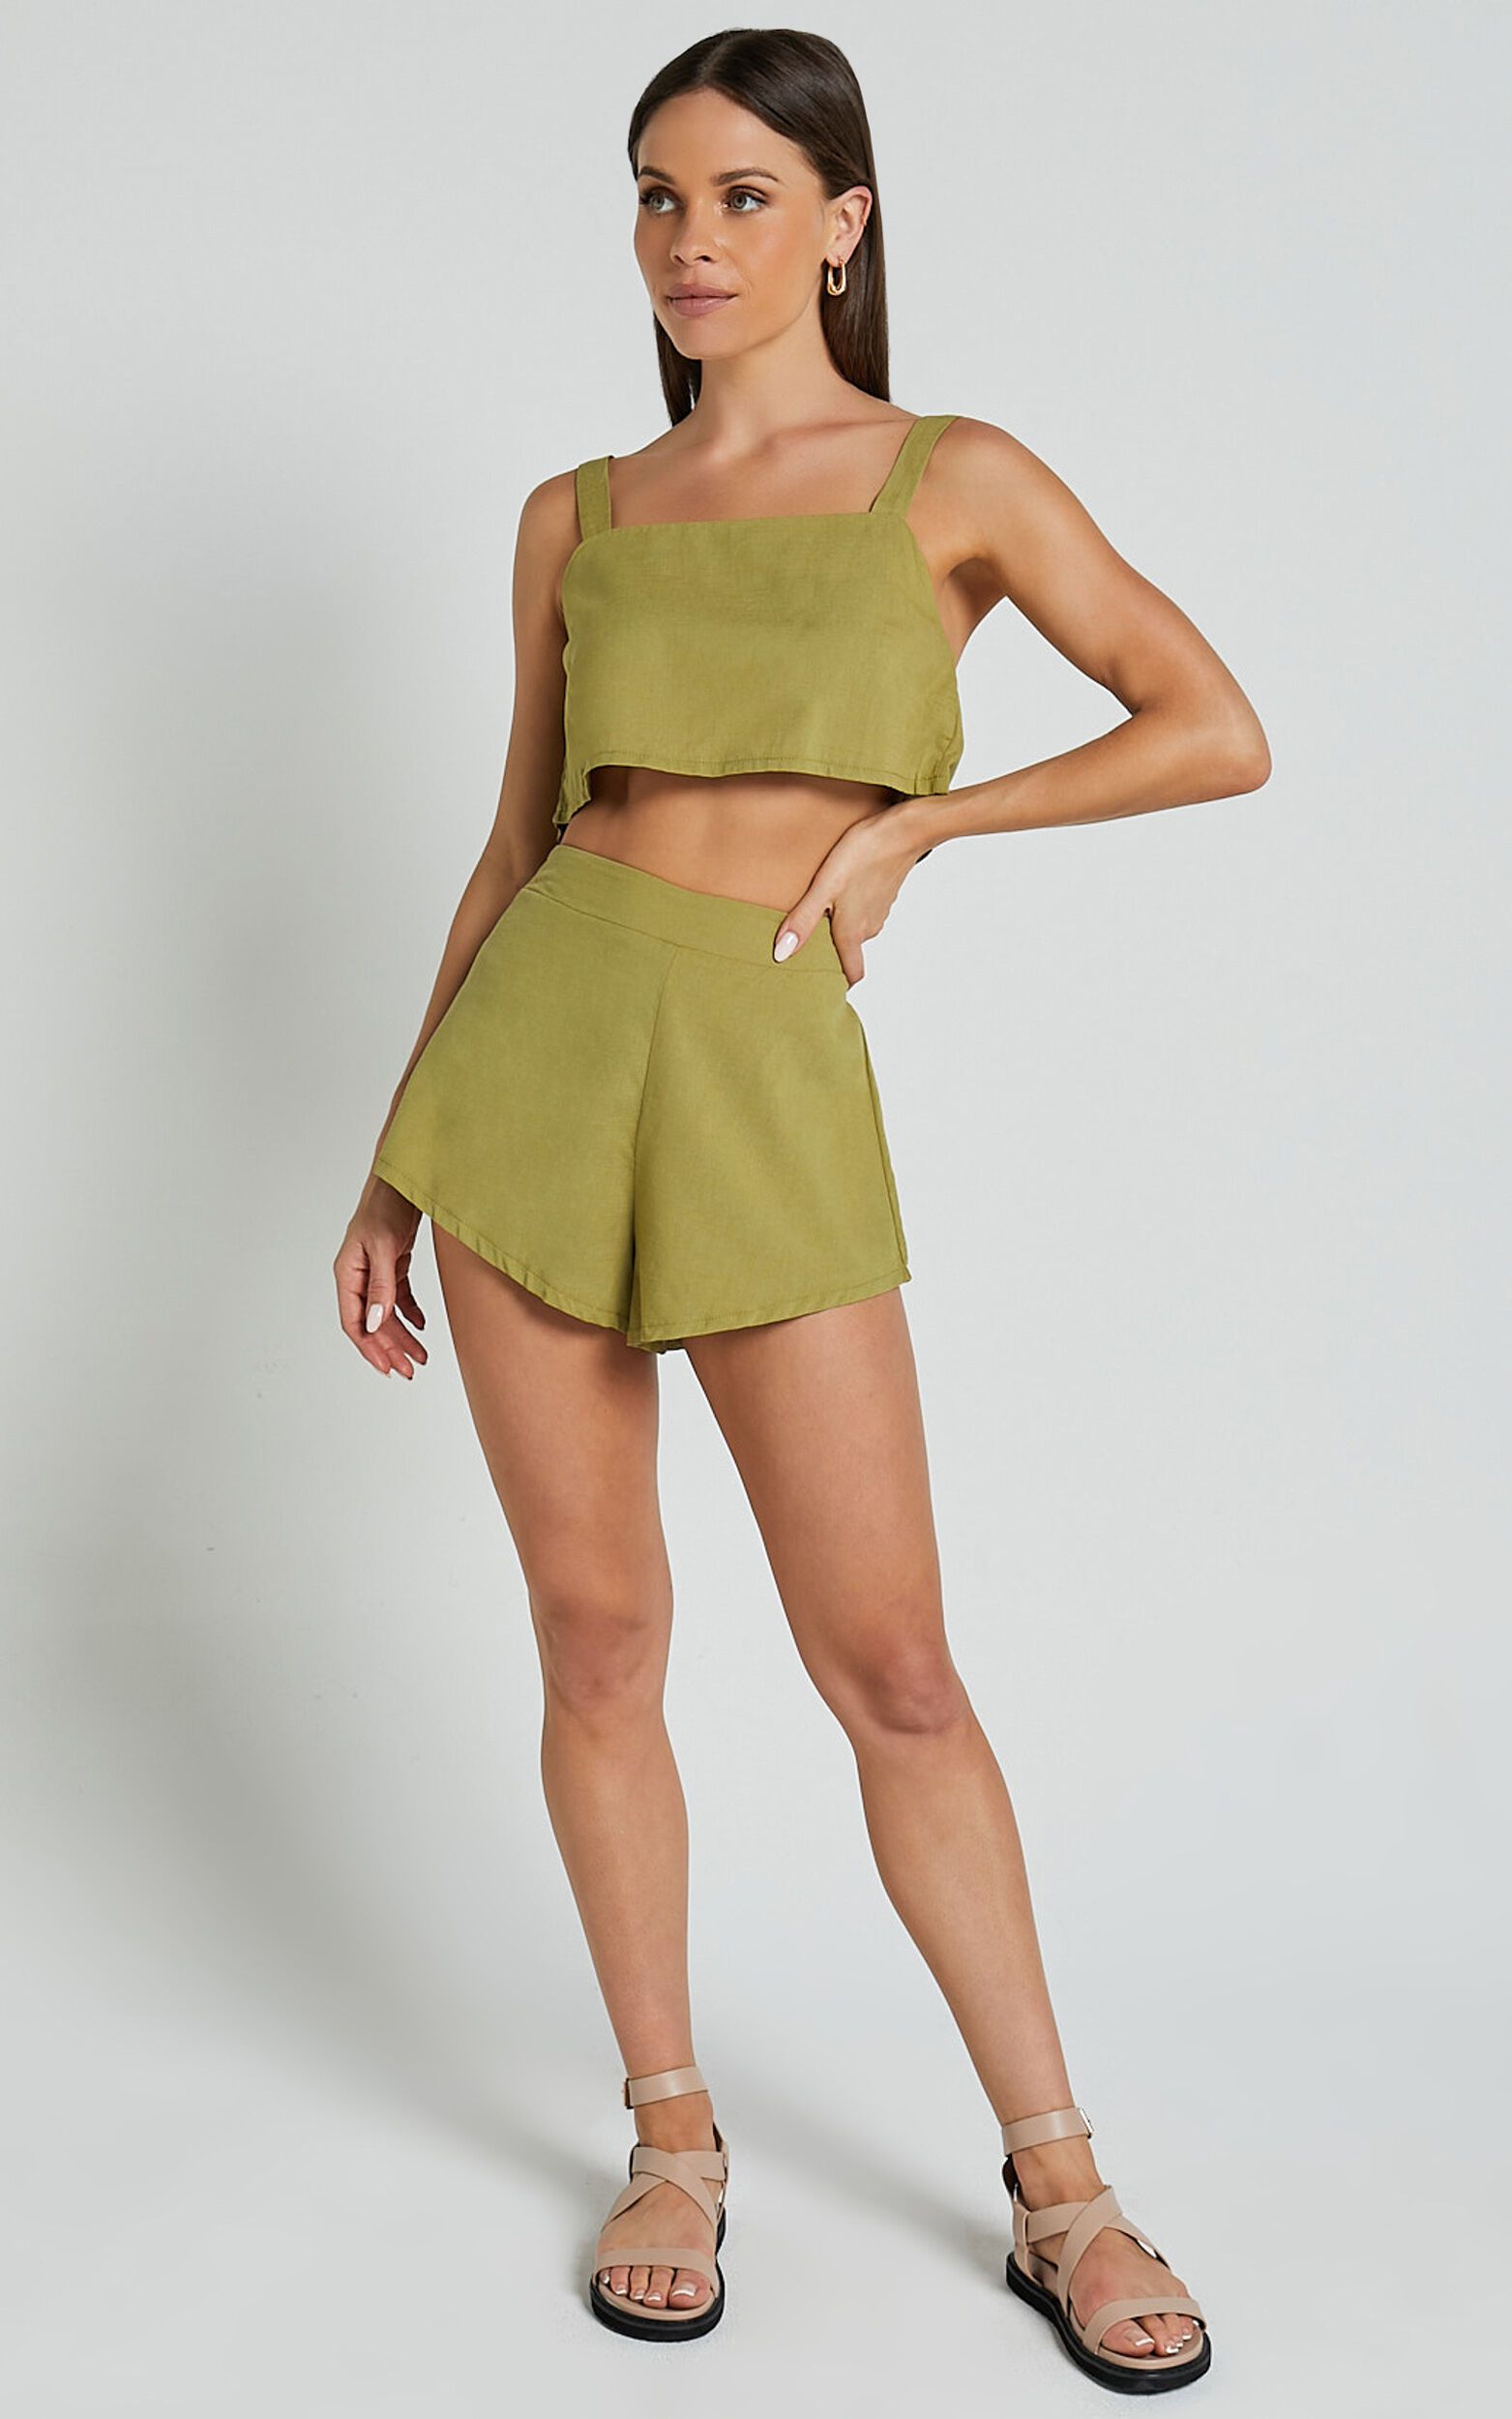 Zanrie Two Piece Set - Linen Look Square Neck Crop Top and High Waist Mini Flare Shorts Set in Ce... | Showpo (US, UK & Europe)